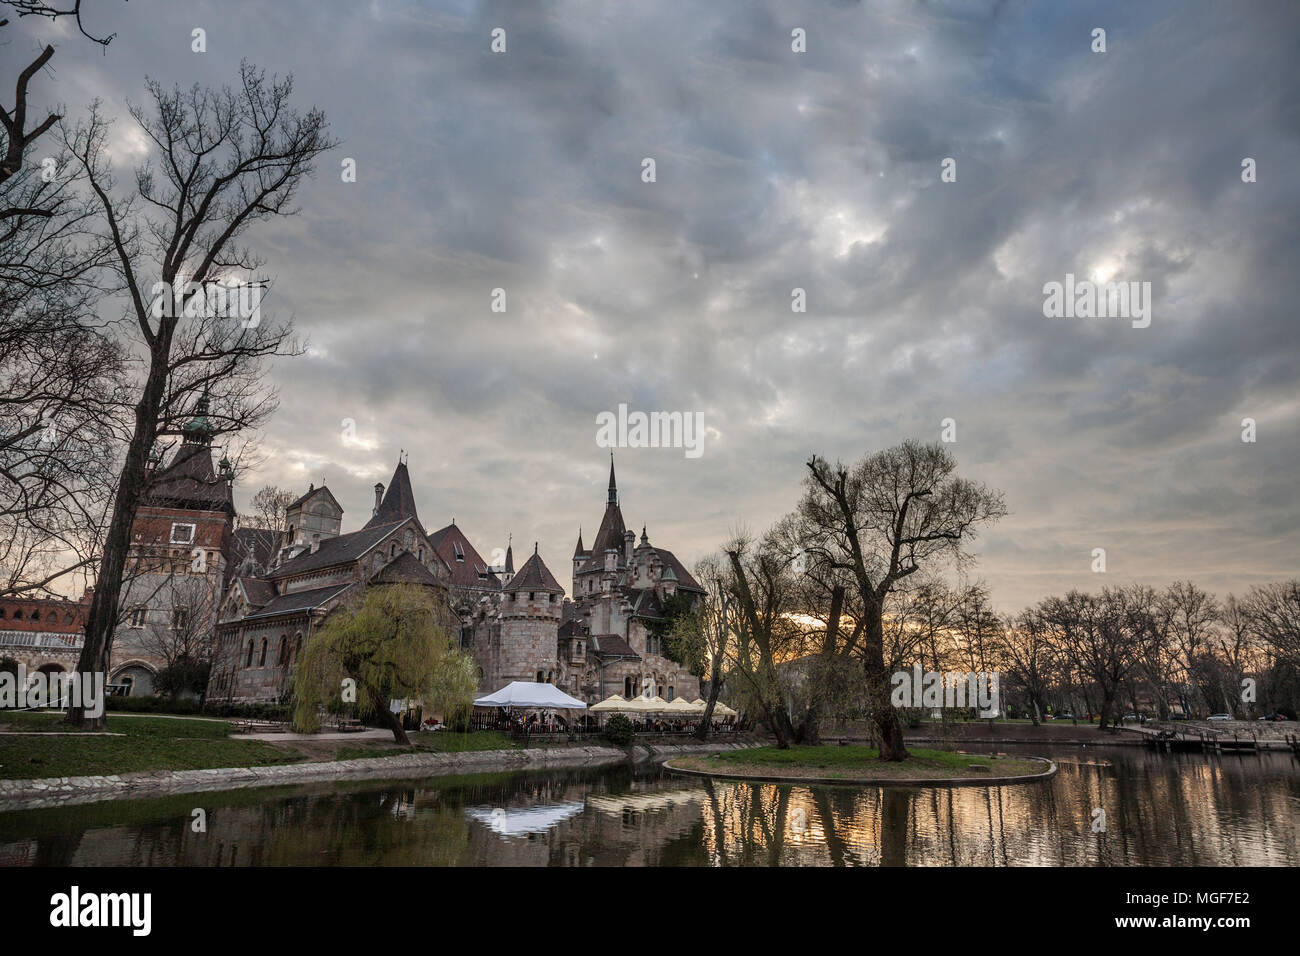 Vajdahunyad Castle in front of a lake in Varosliget Park (the city park) in Budapest, Hungary. Located near Szechenyi bath, it is one of the main monu Stock Photo